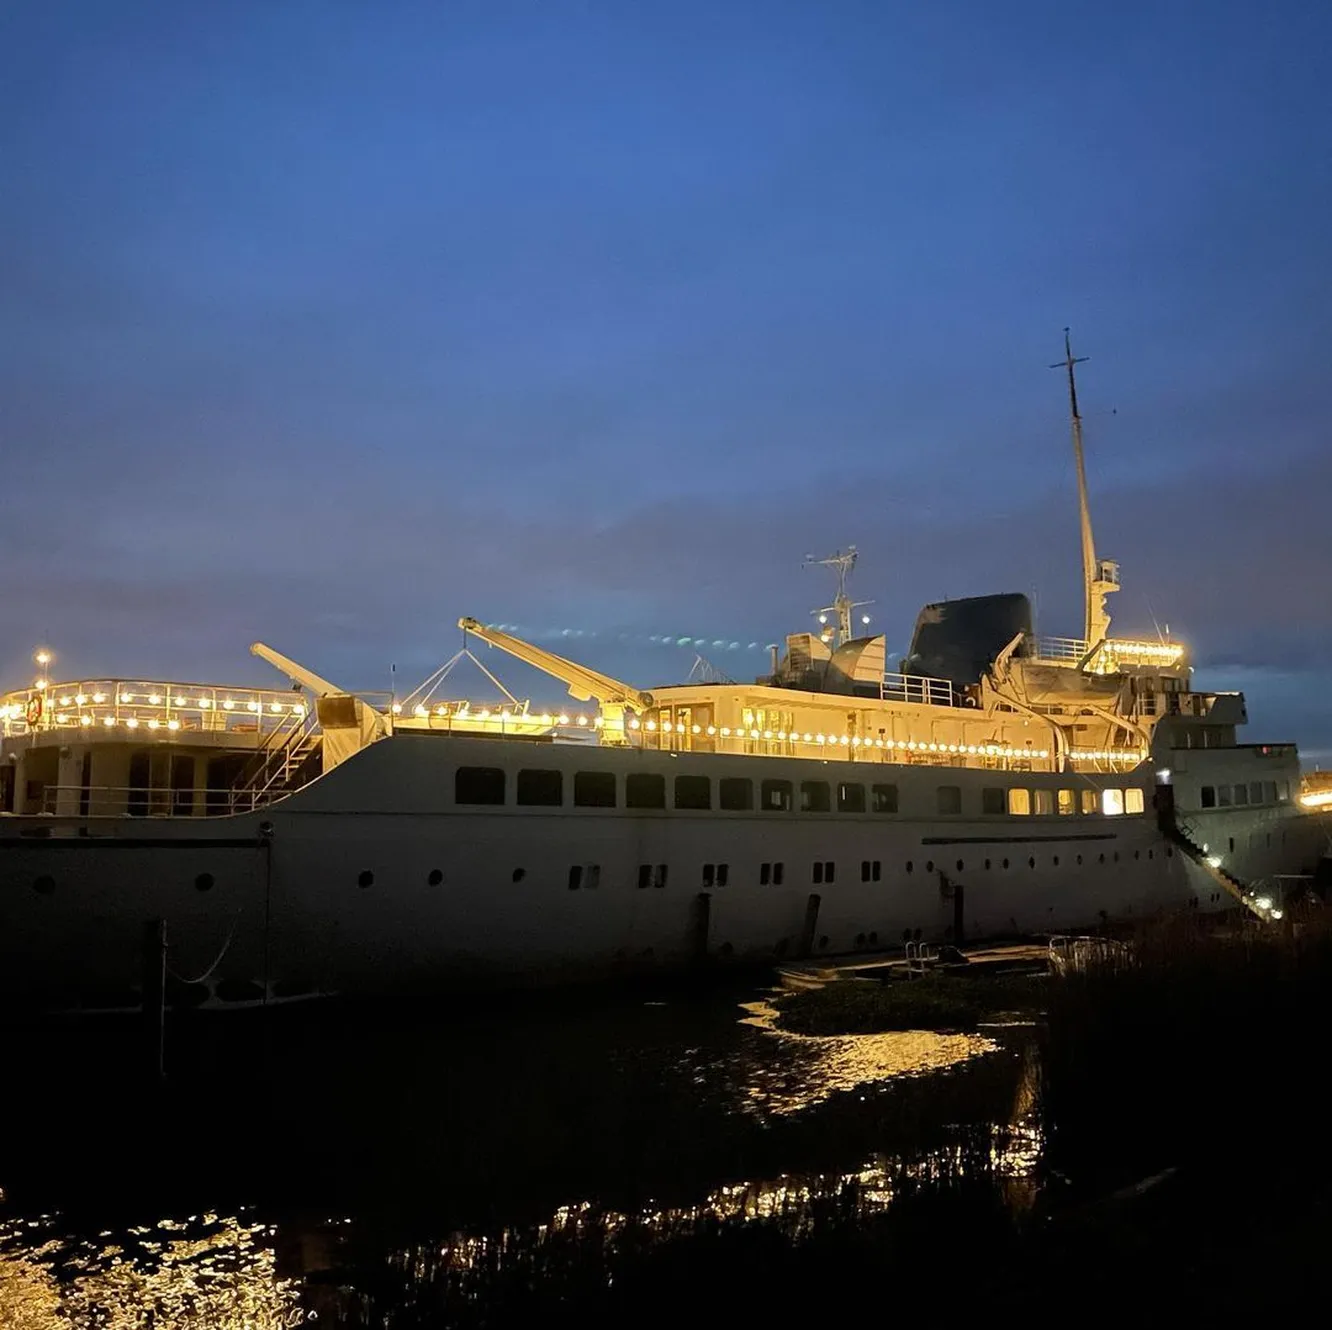 A man bought an old cruise ship from an advertisement and converted it for a living: this is what it looks like from the inside